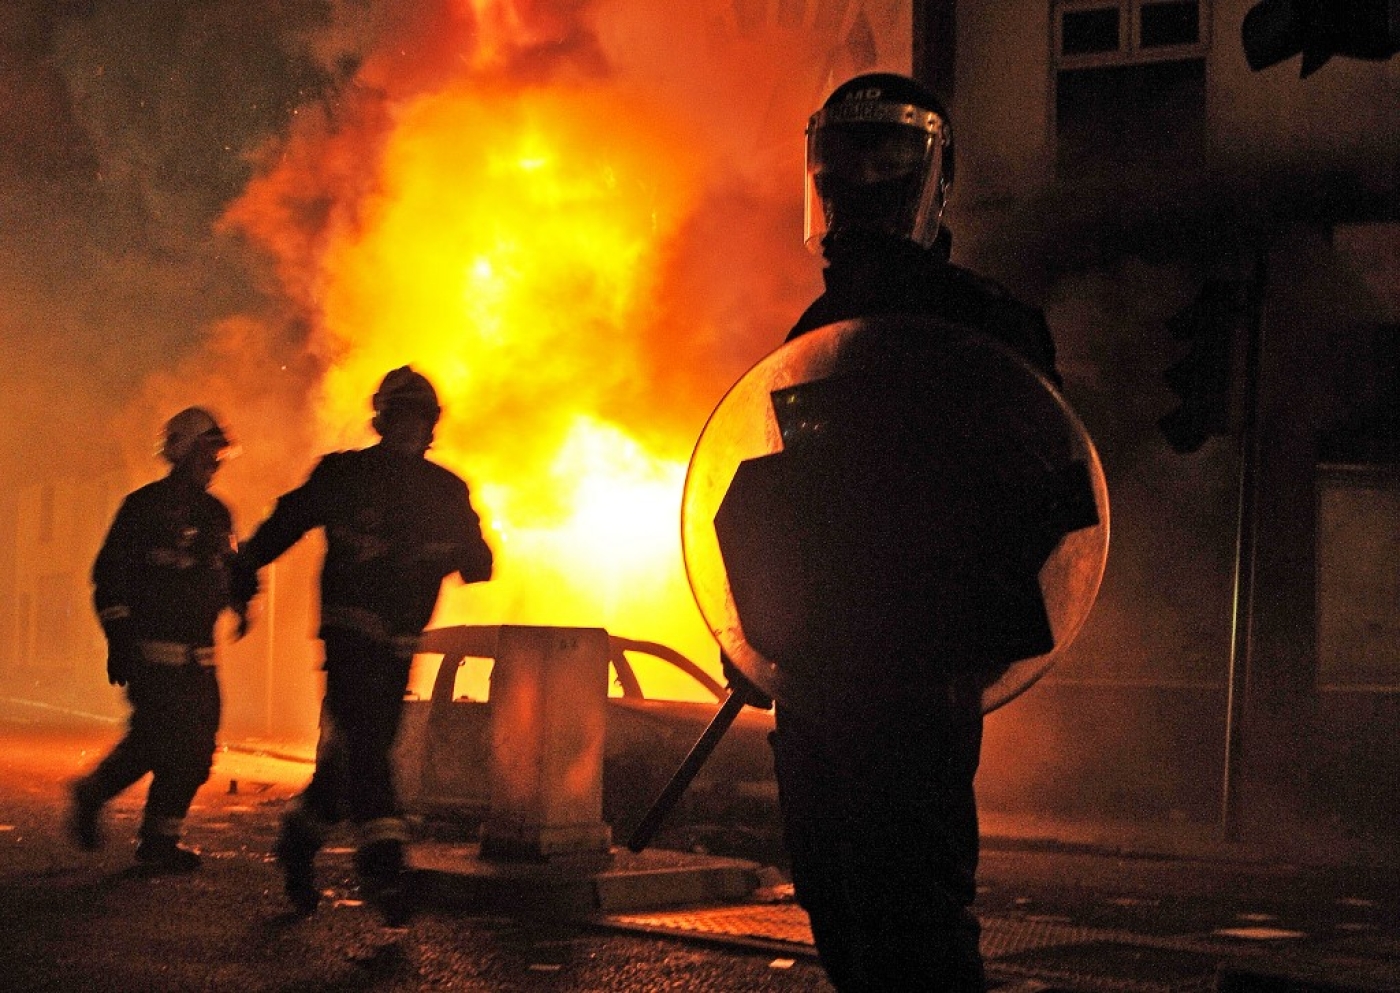 A riot police officer stands guard in front of a burning building during riots in Croydon, south London, in 2011 (AFP)